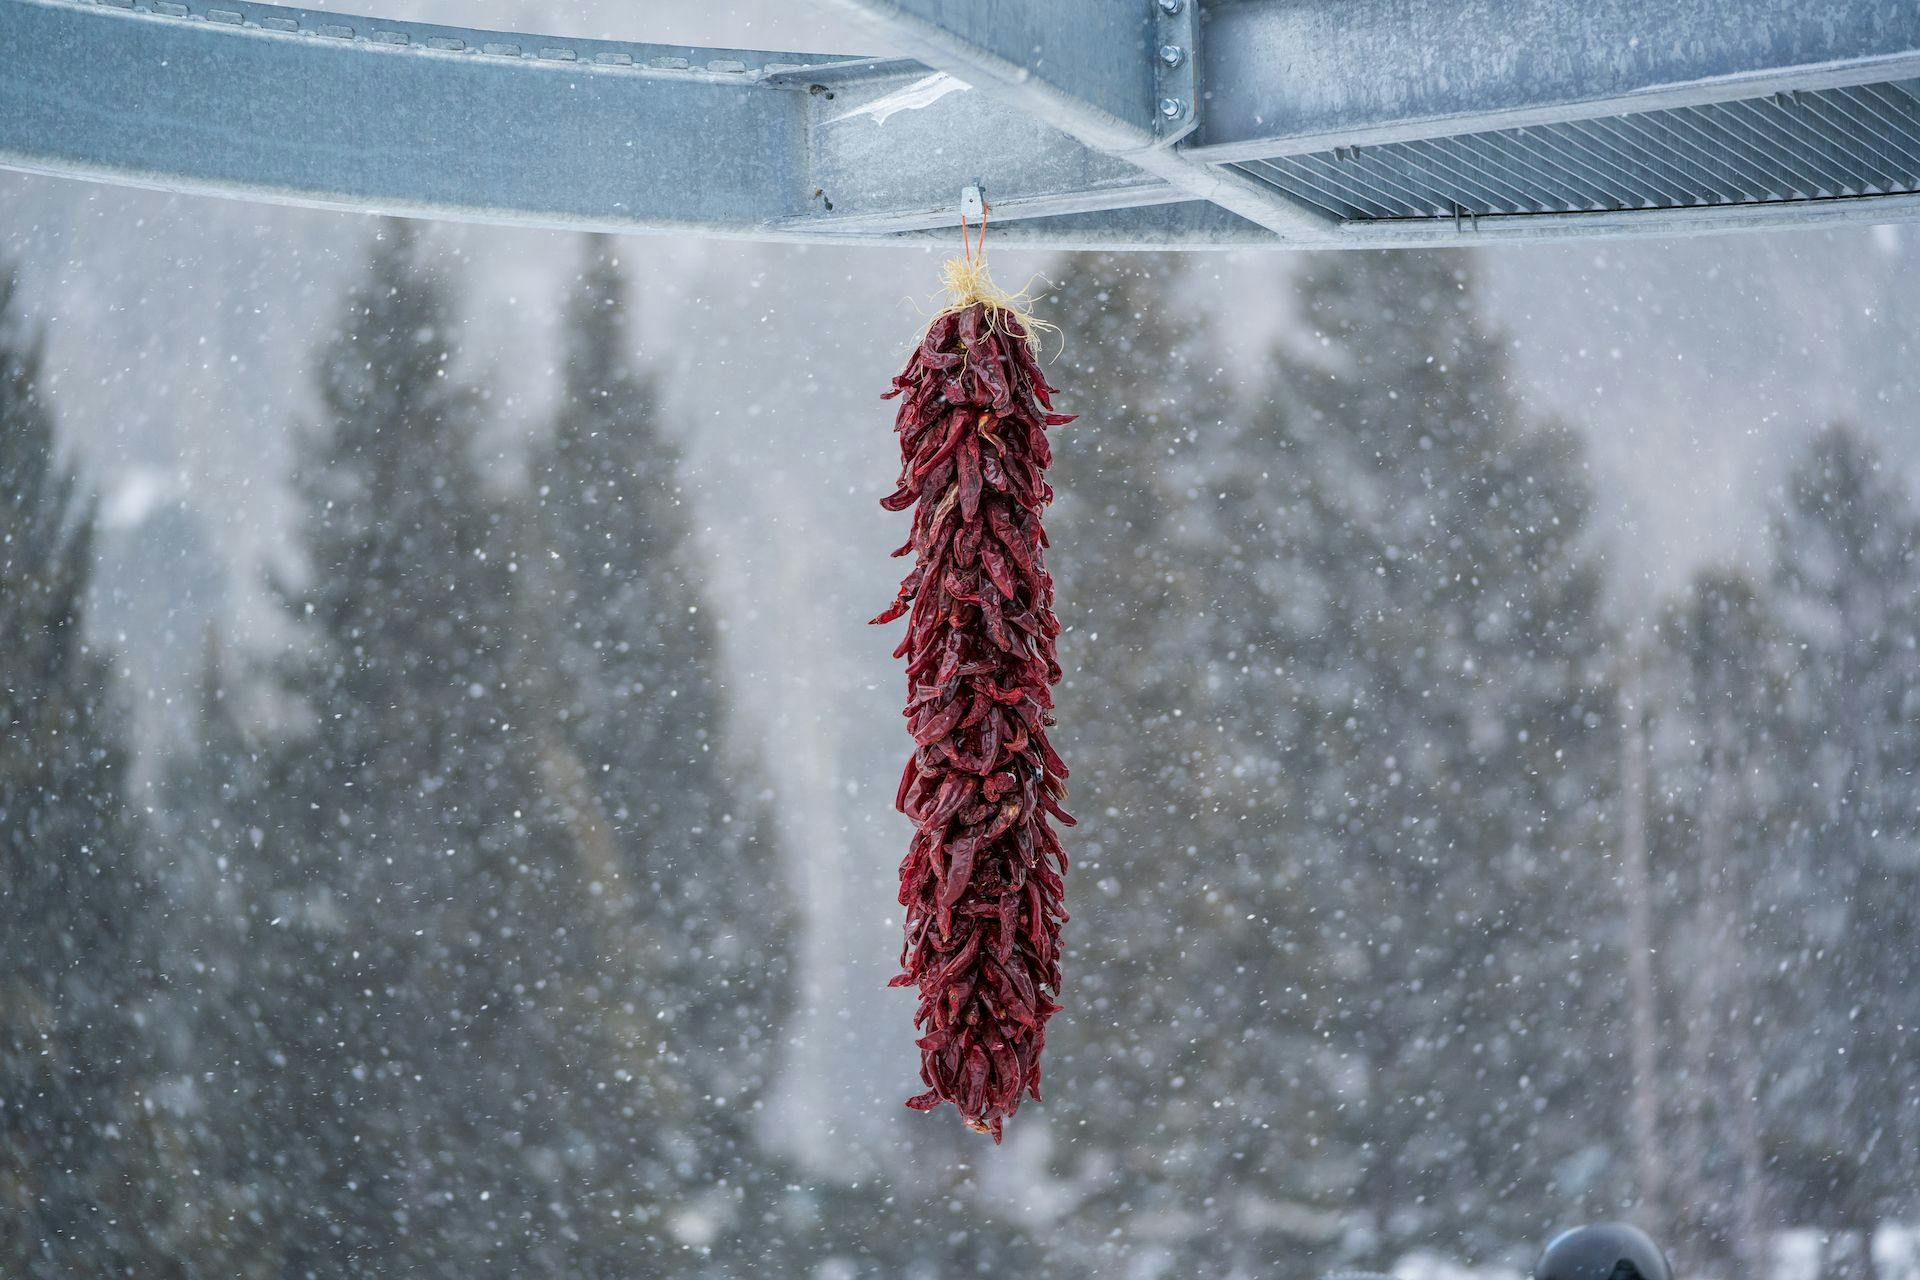 a bushel of dried chilis hangs privately from a ski lift on a snowy day